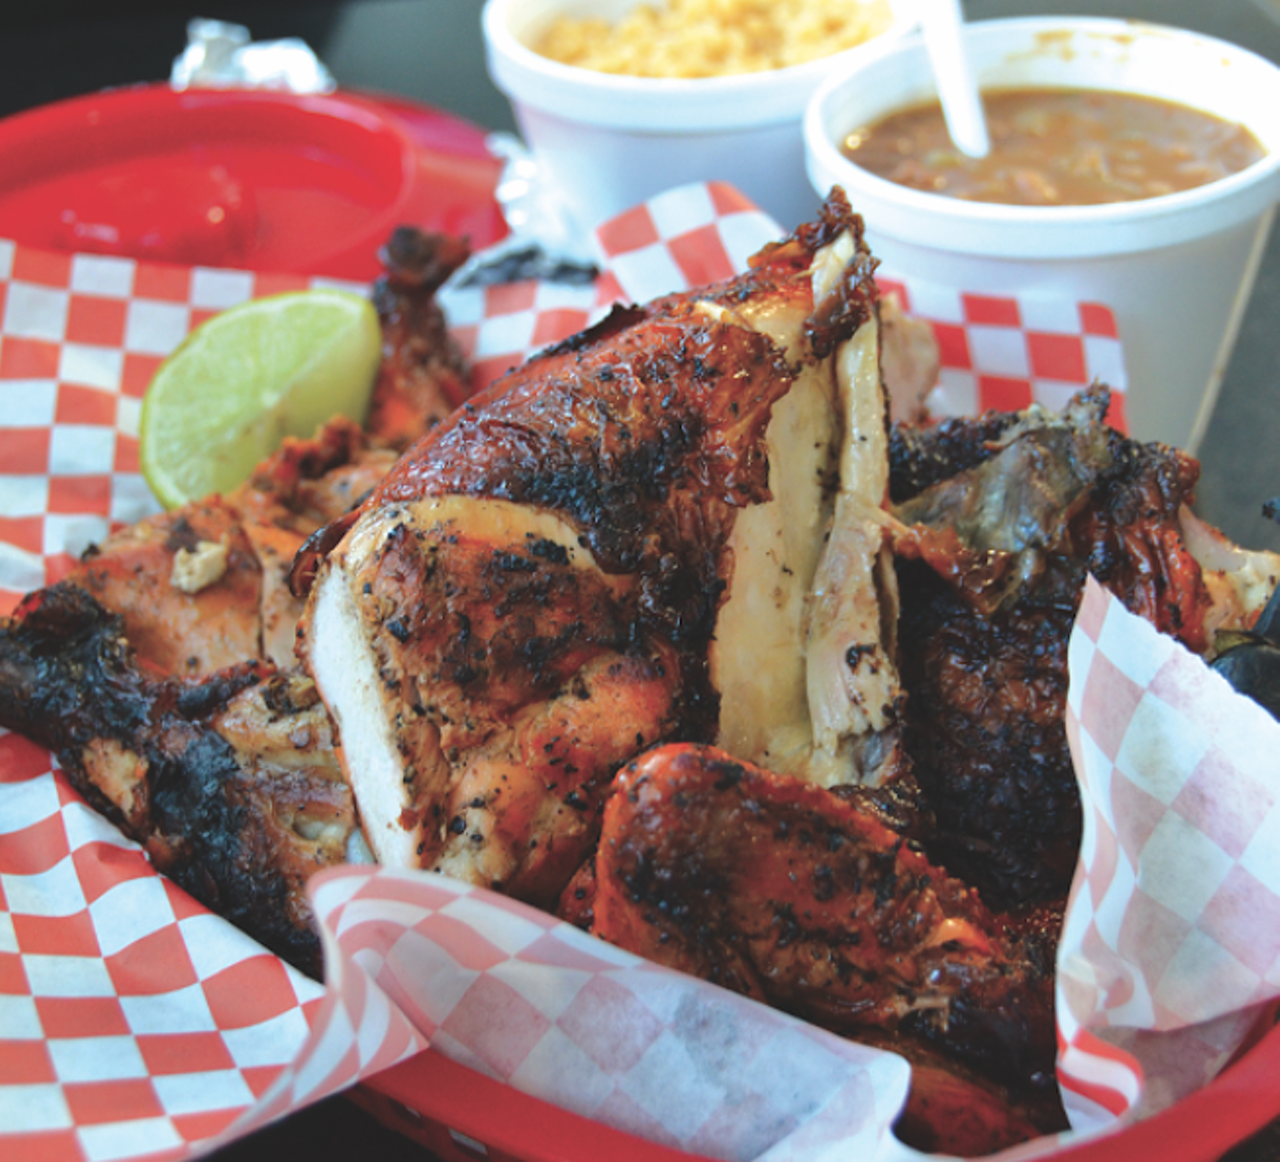 Pollos Asados “El Carbonero”
619 S General McMullen Dr., (210) 907-5573, elcarboneropolloycarne.negocio.site
Los Carboneros may only be a little over a year old, but the service is stellar and the pollos are made fresh daily in a trailer-grill. It really doesn’t get more puro than that.
Photo by Jessica Elizarraras